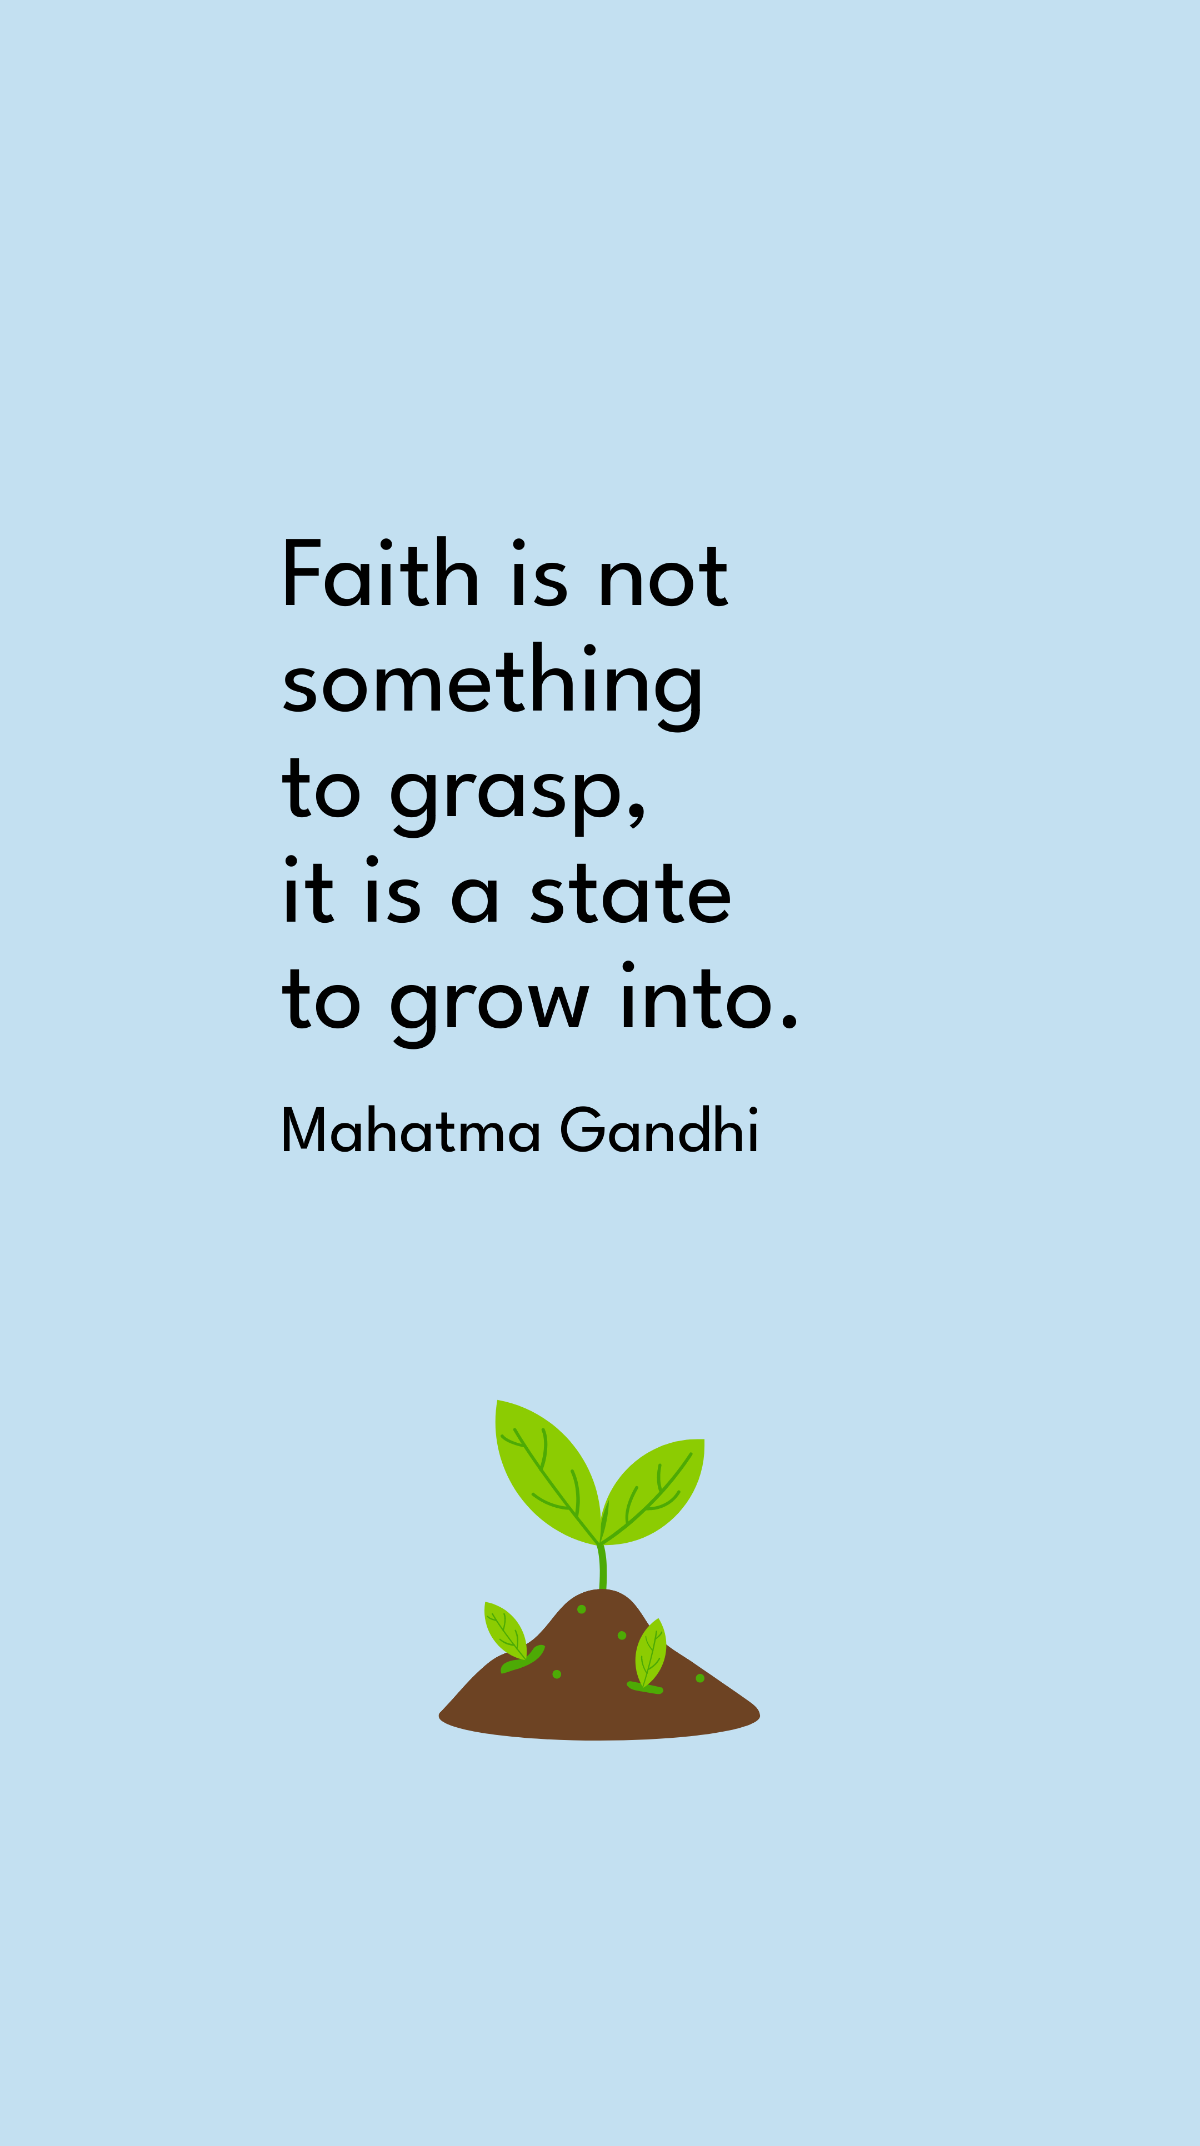 Free Mahatma Gandhi - Faith is not something to grasp, it is a state to grow into. Template